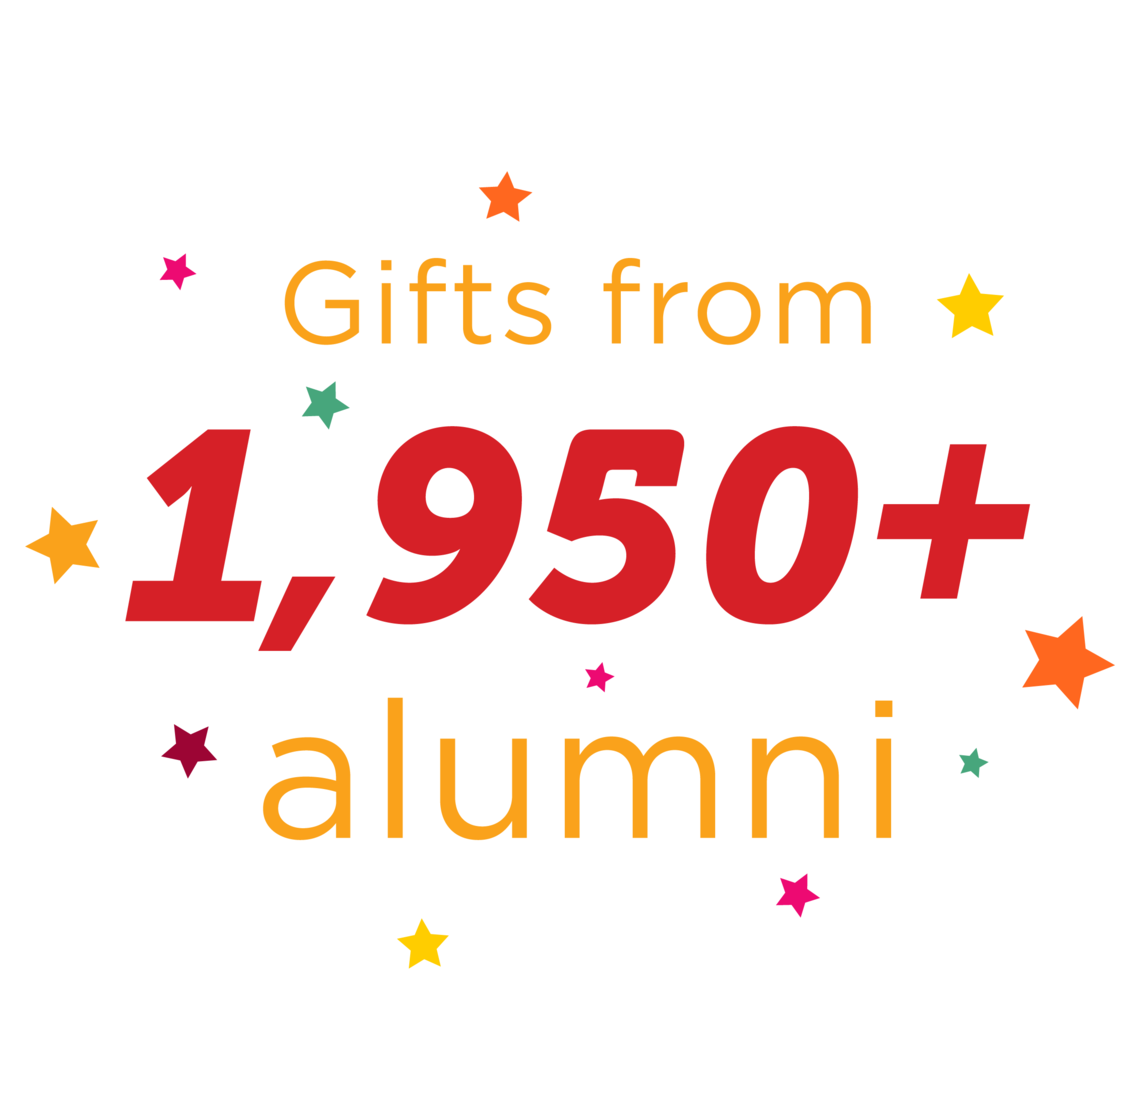 Gifts from 1,950+ alumni